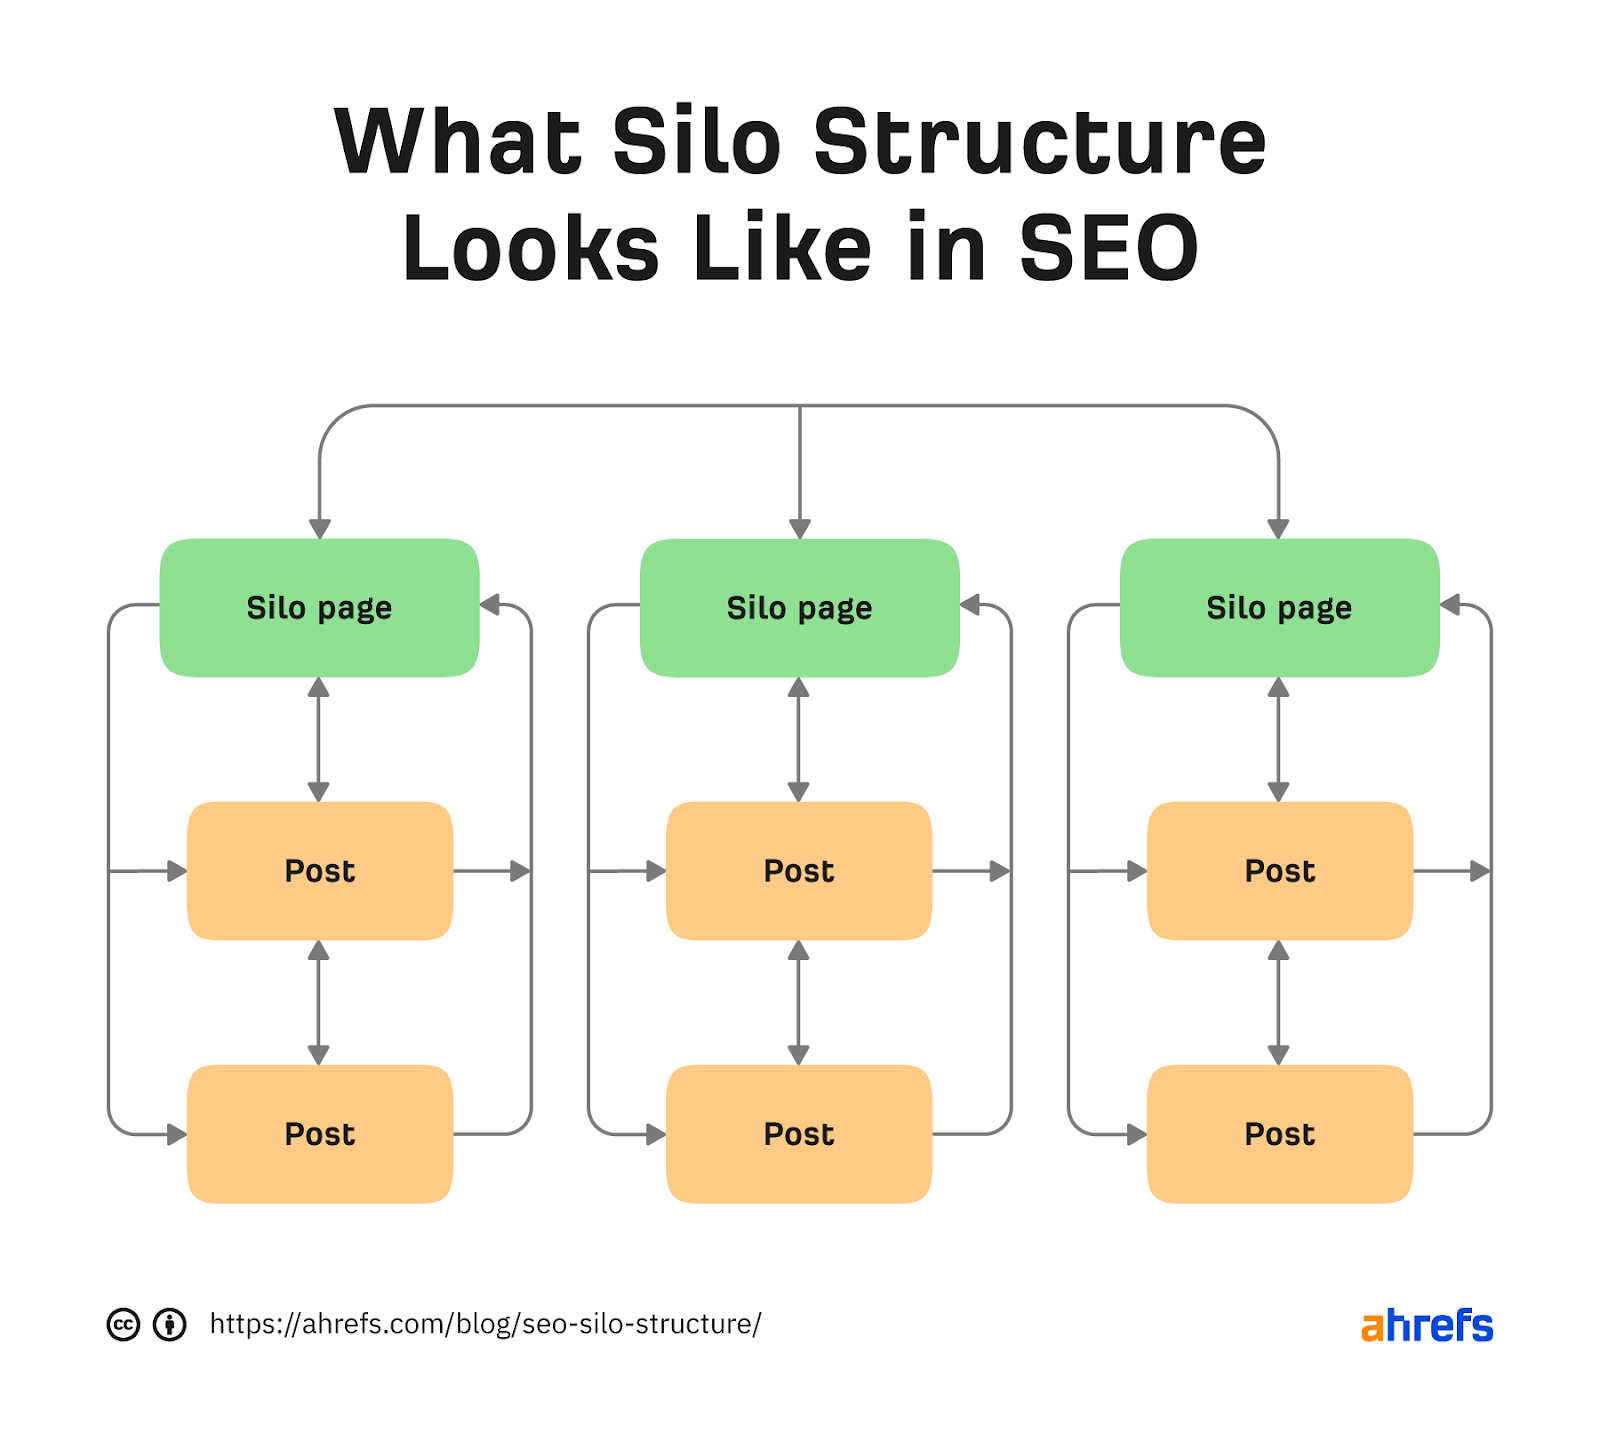 Flowchart of silo structure in SEO